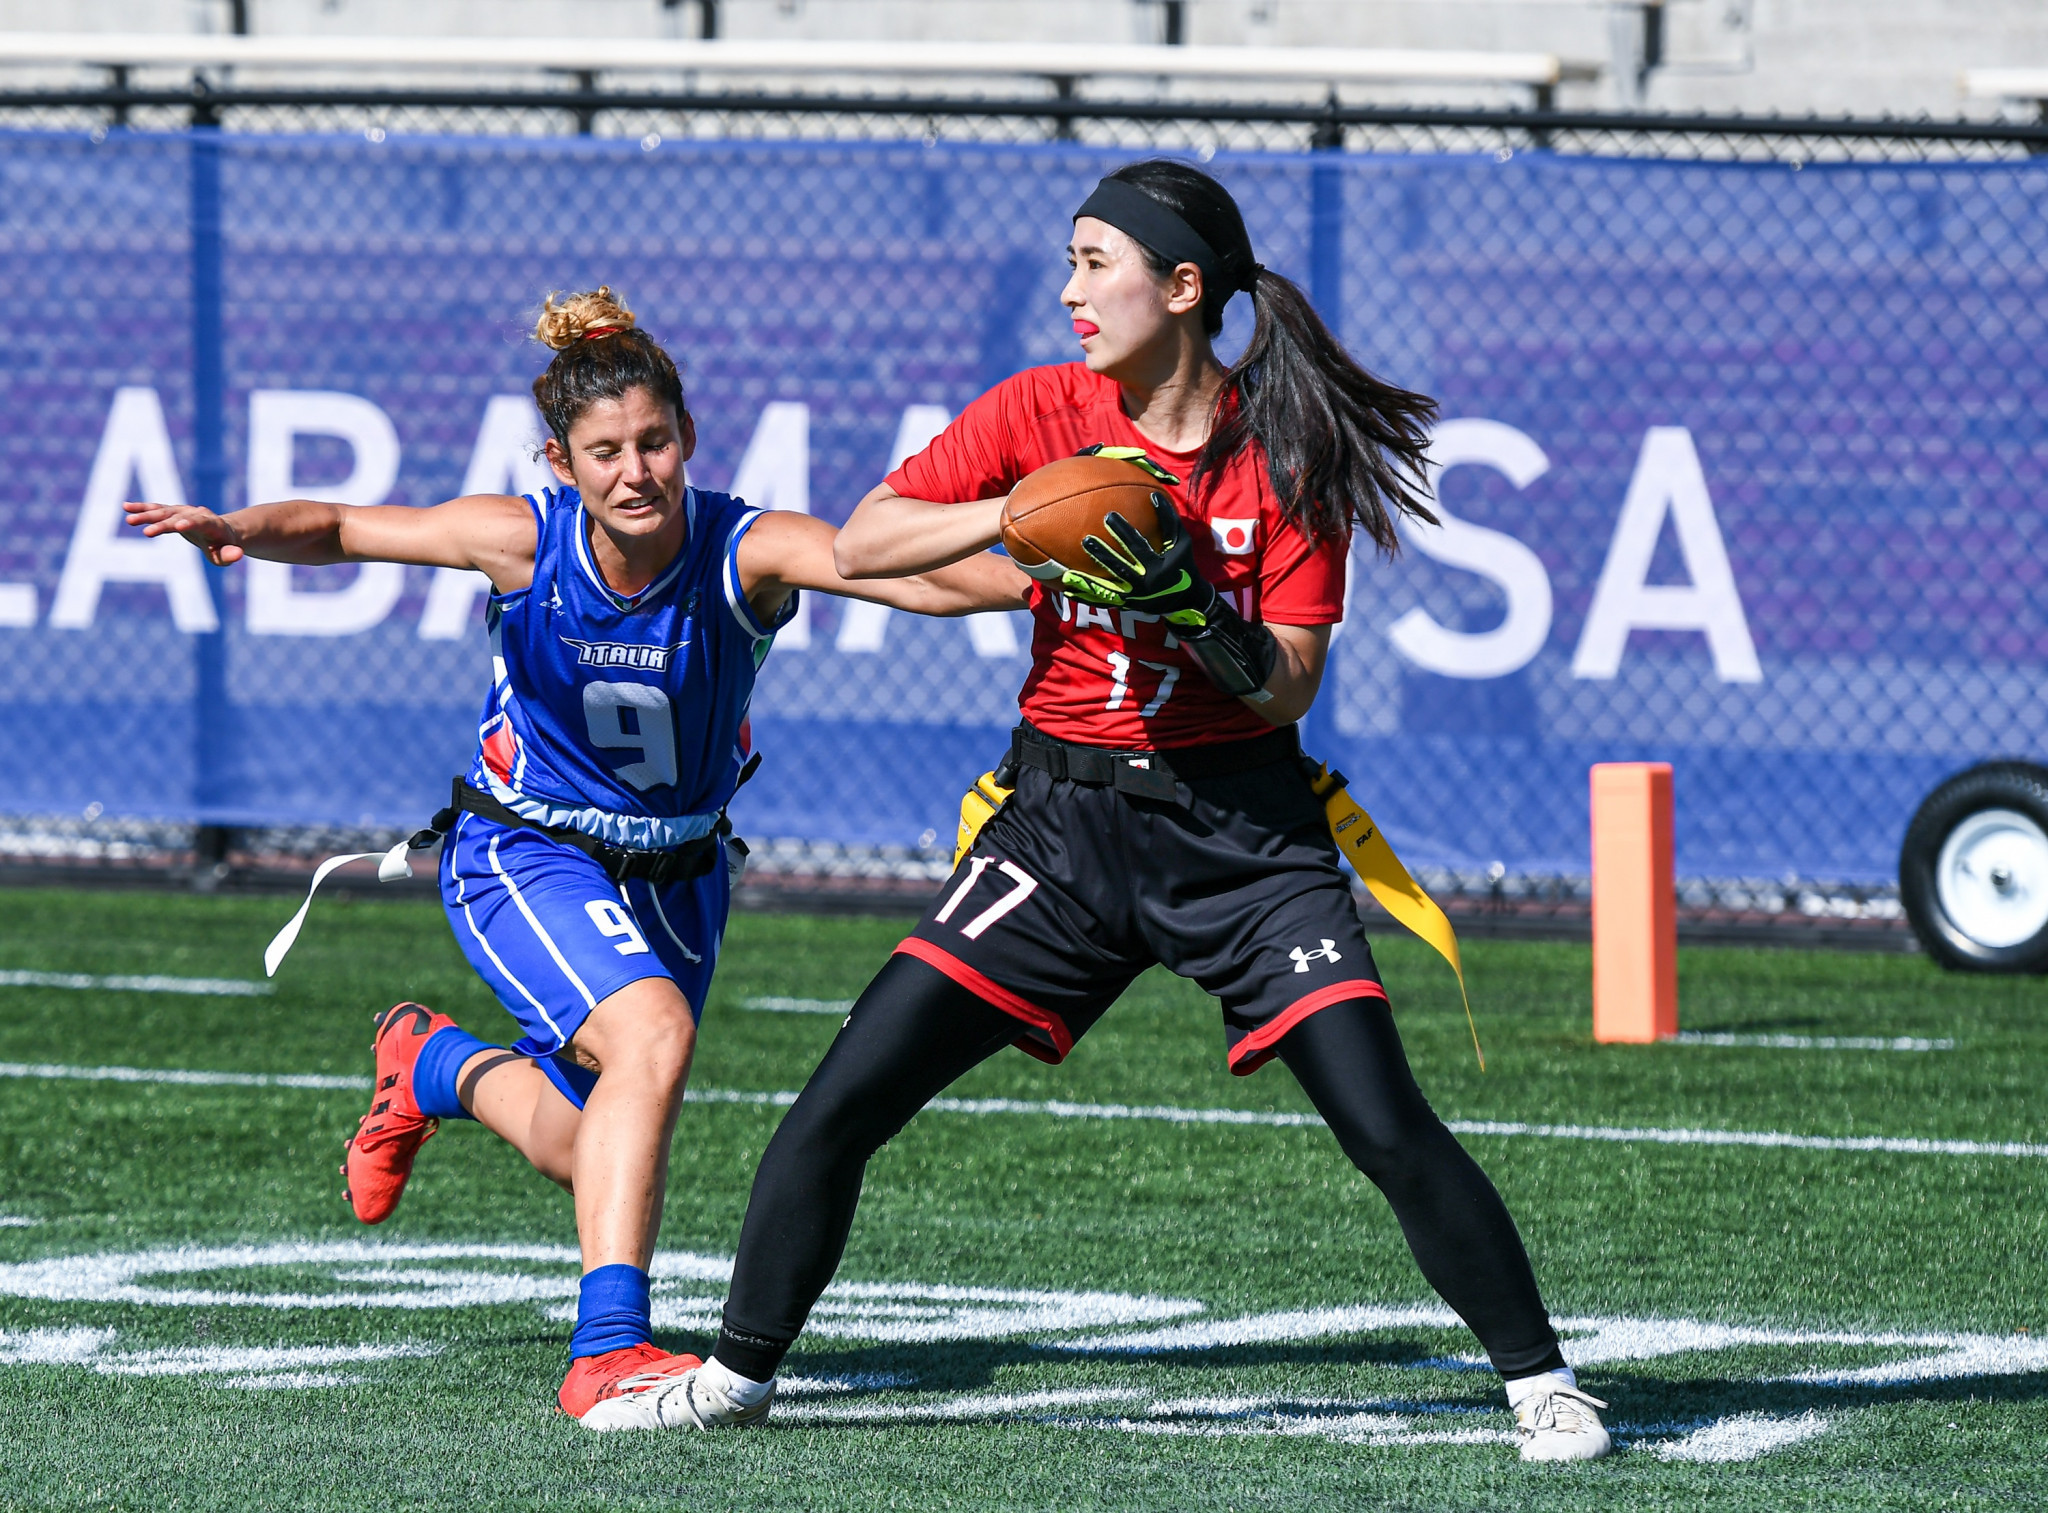 Los Angeles 2028 could be just the start for flag football as IFAF eyes further Olympic collaboration 